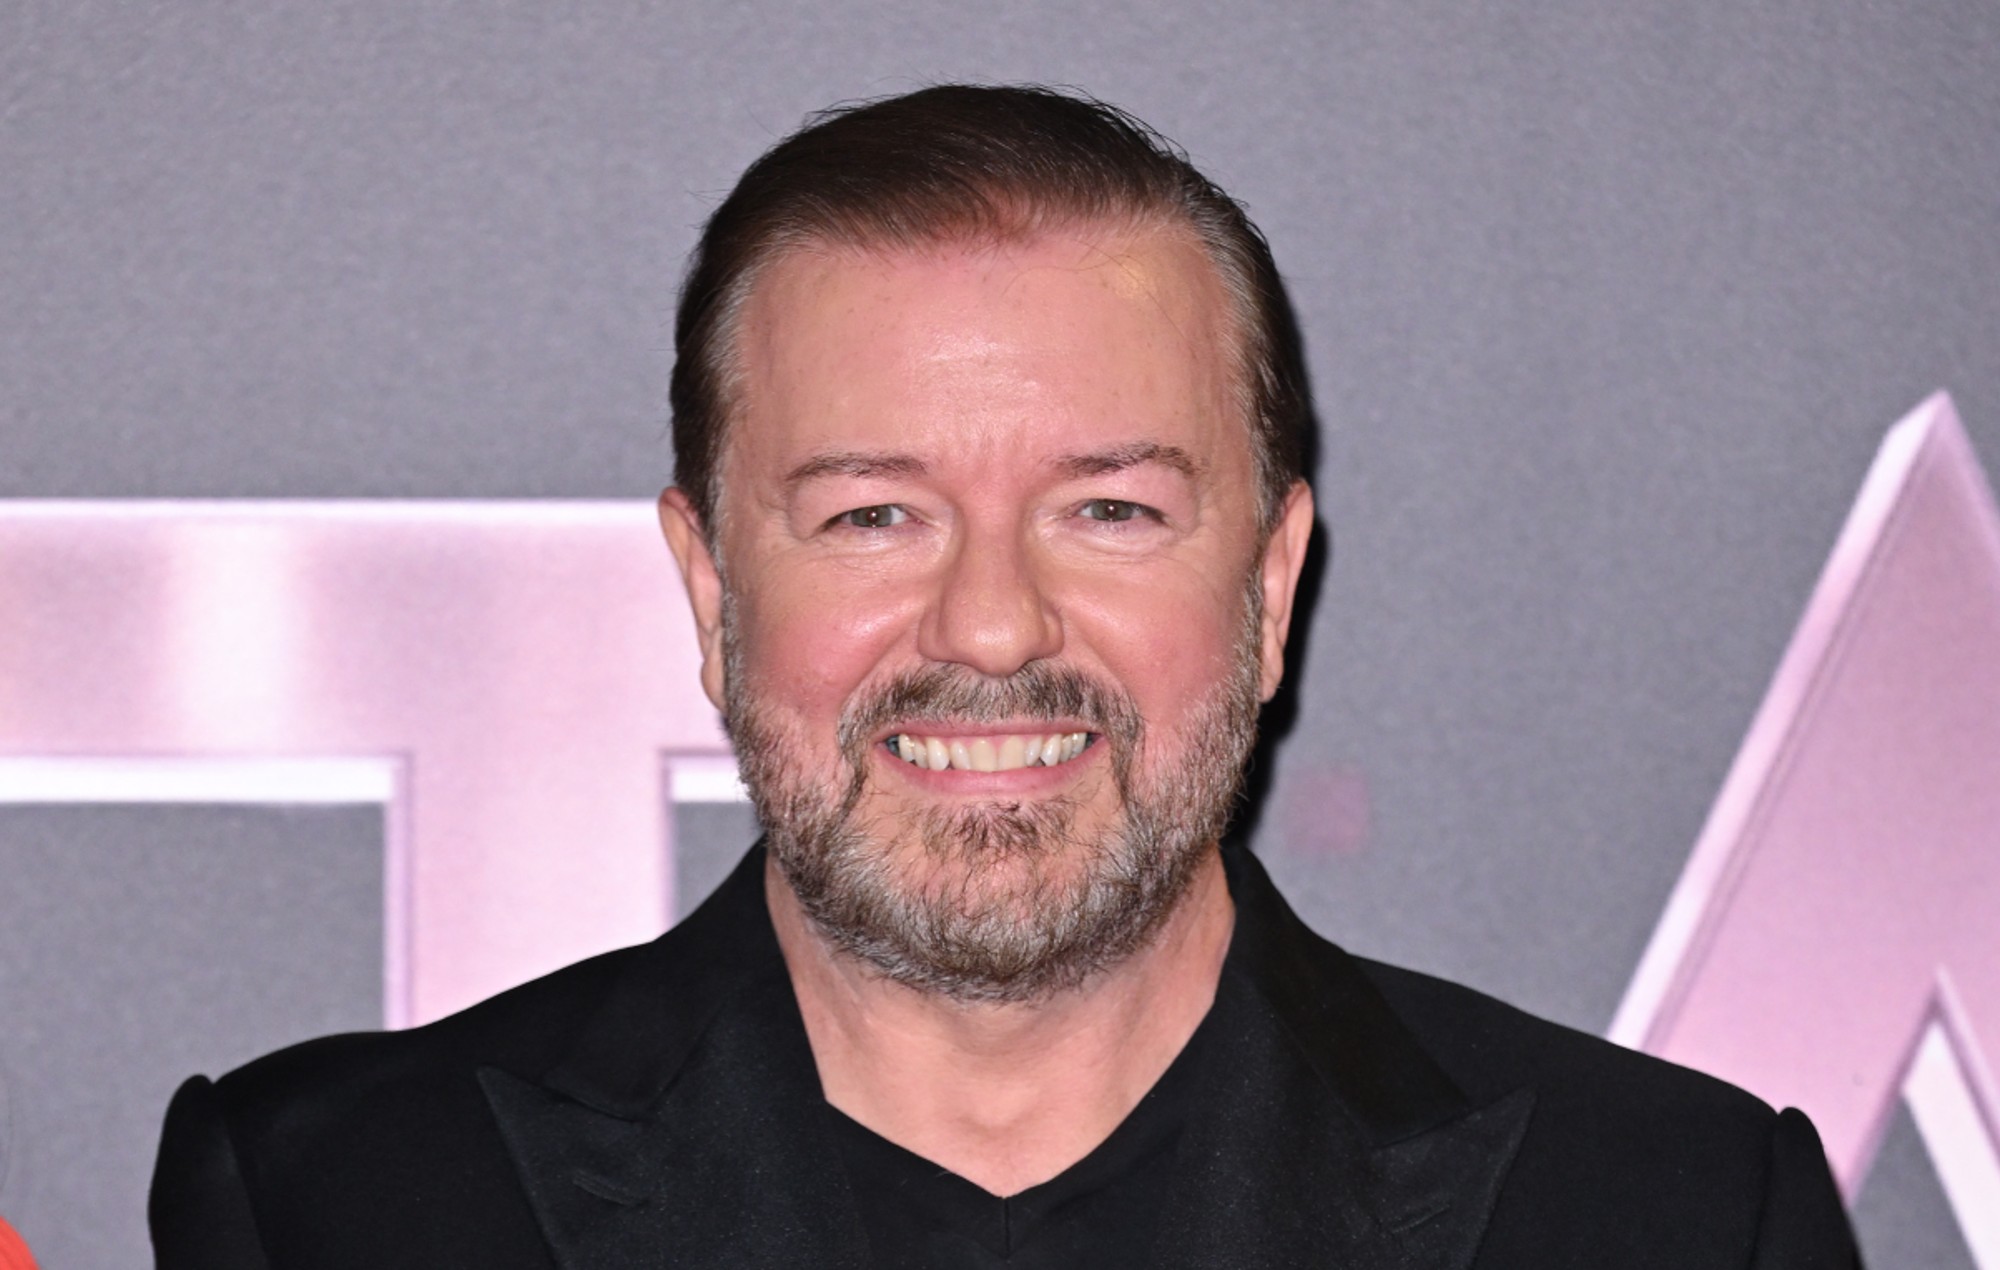 Ricky Gervais criticised for using ableist slur in Netflix special